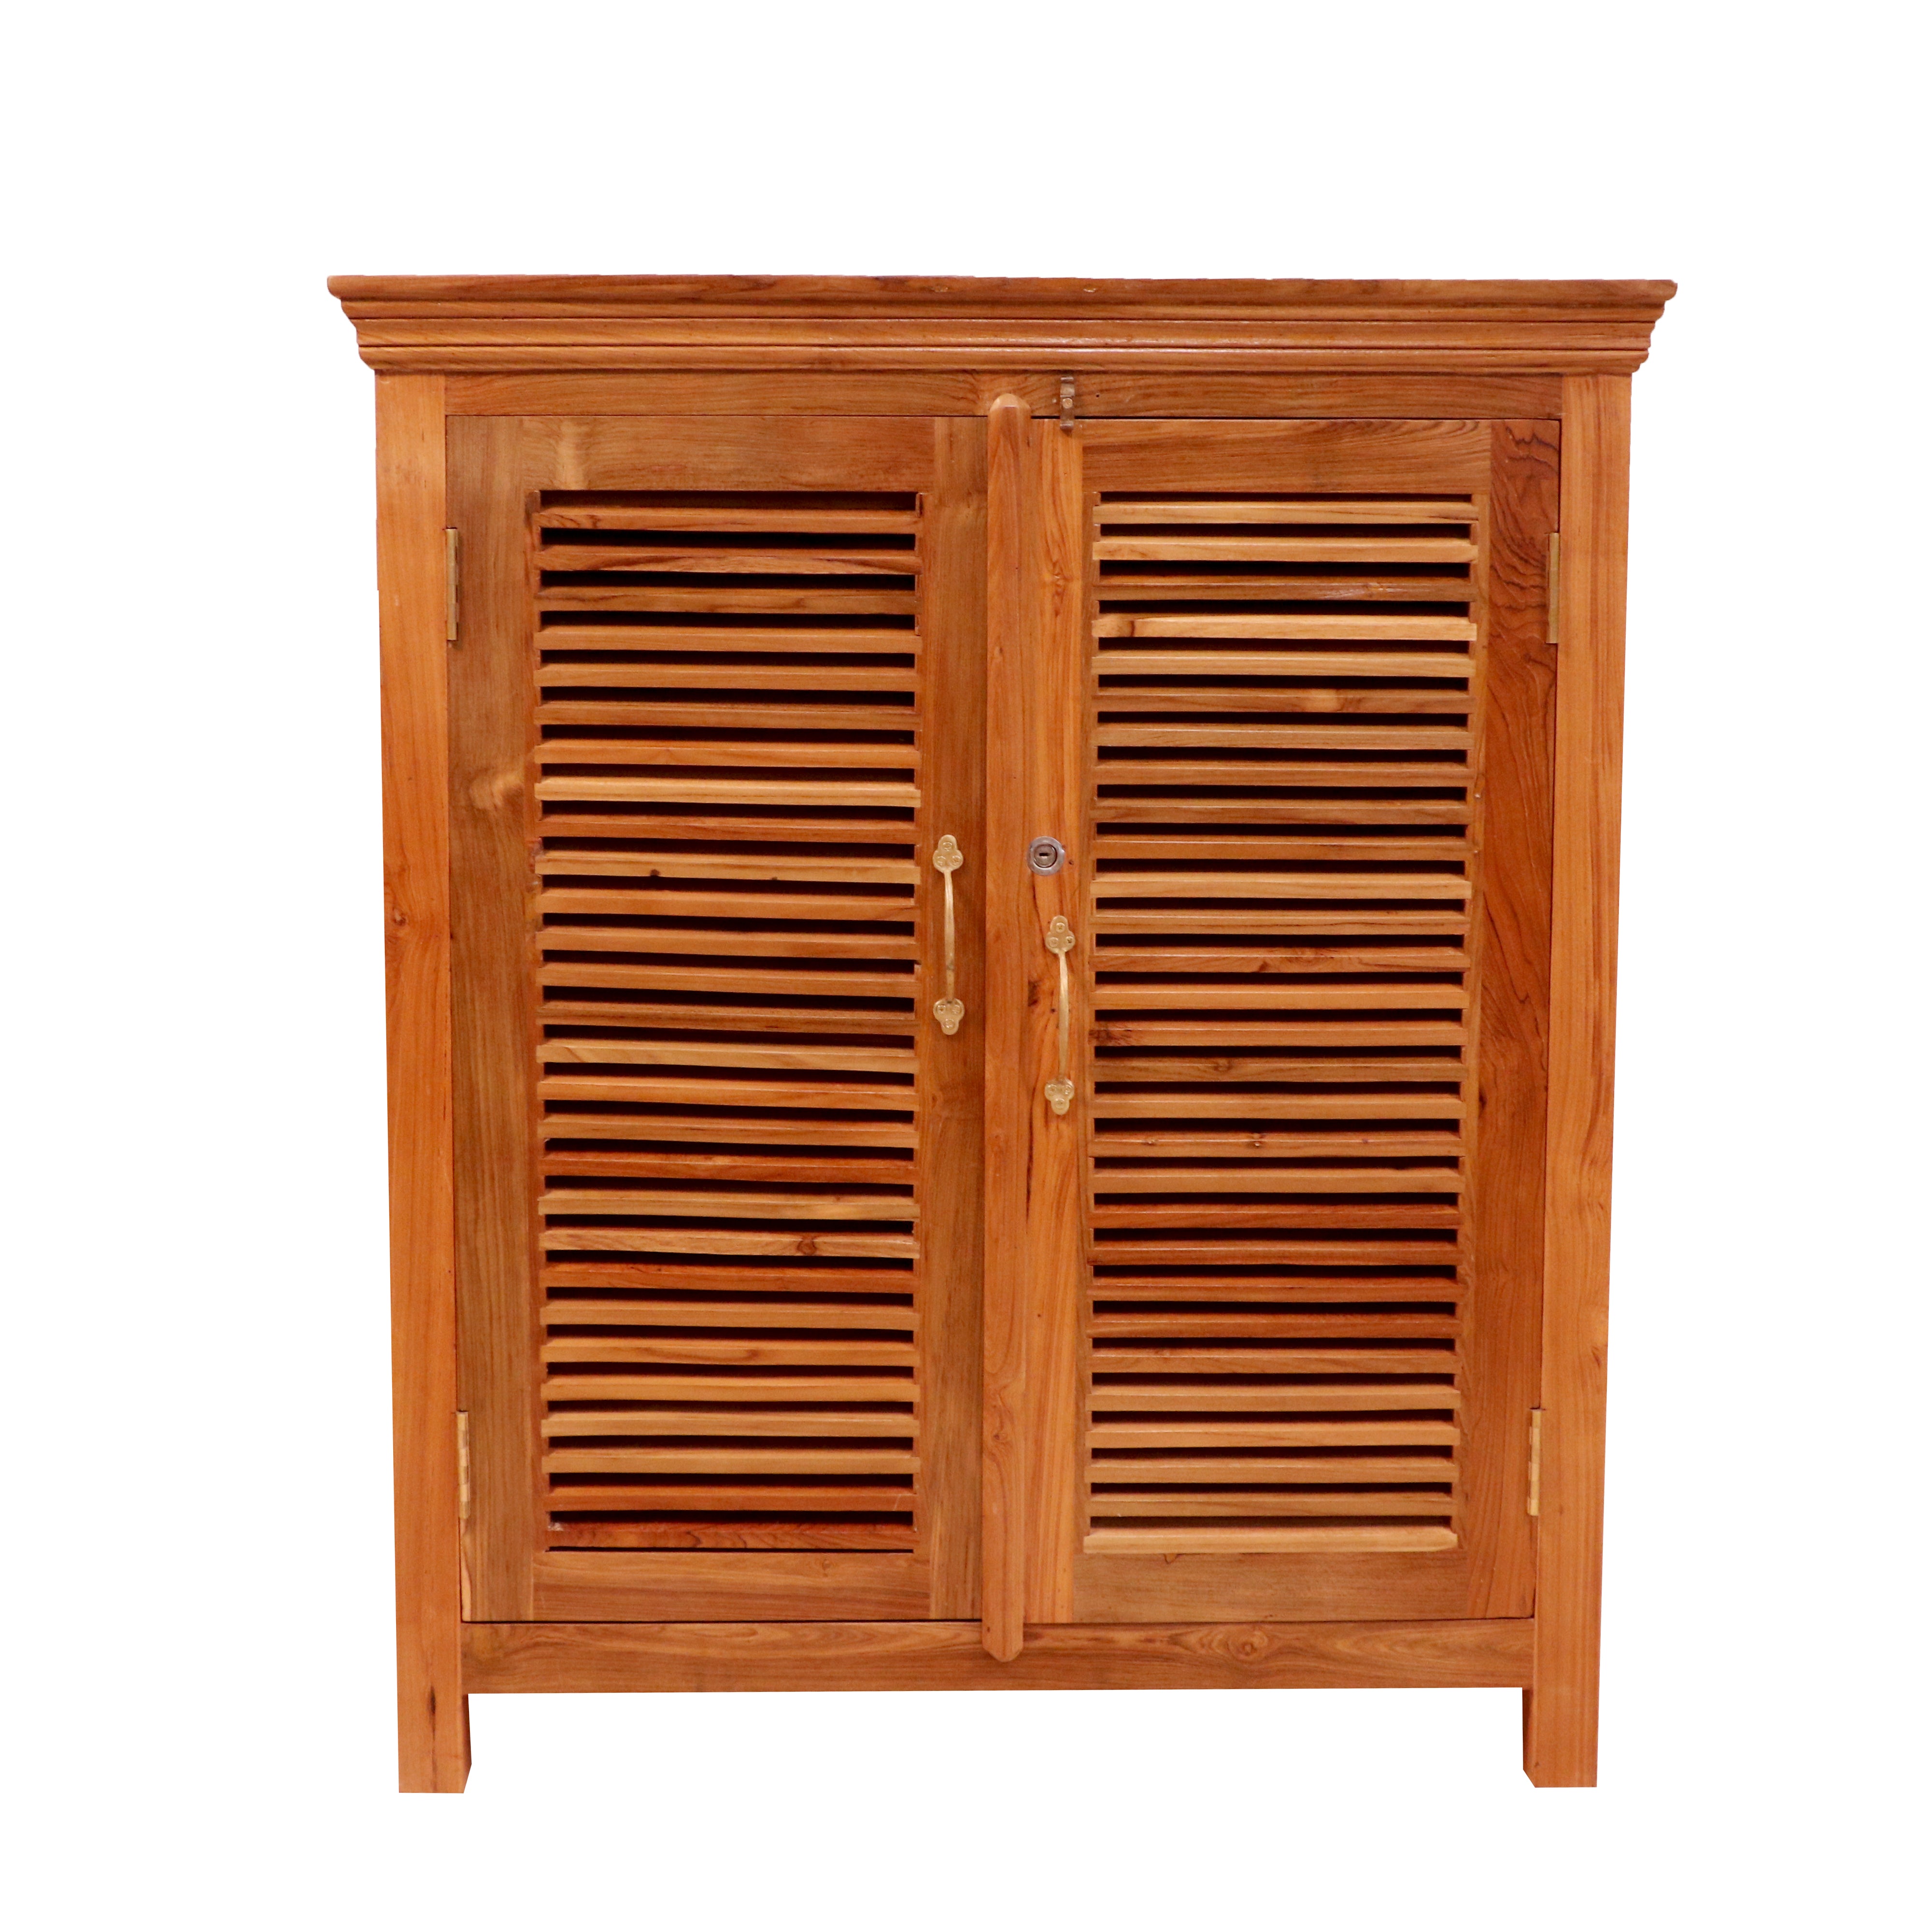 Fusion Simple Stripped Handmade Wooden Simple Storage Cupboard for Home Cupboard